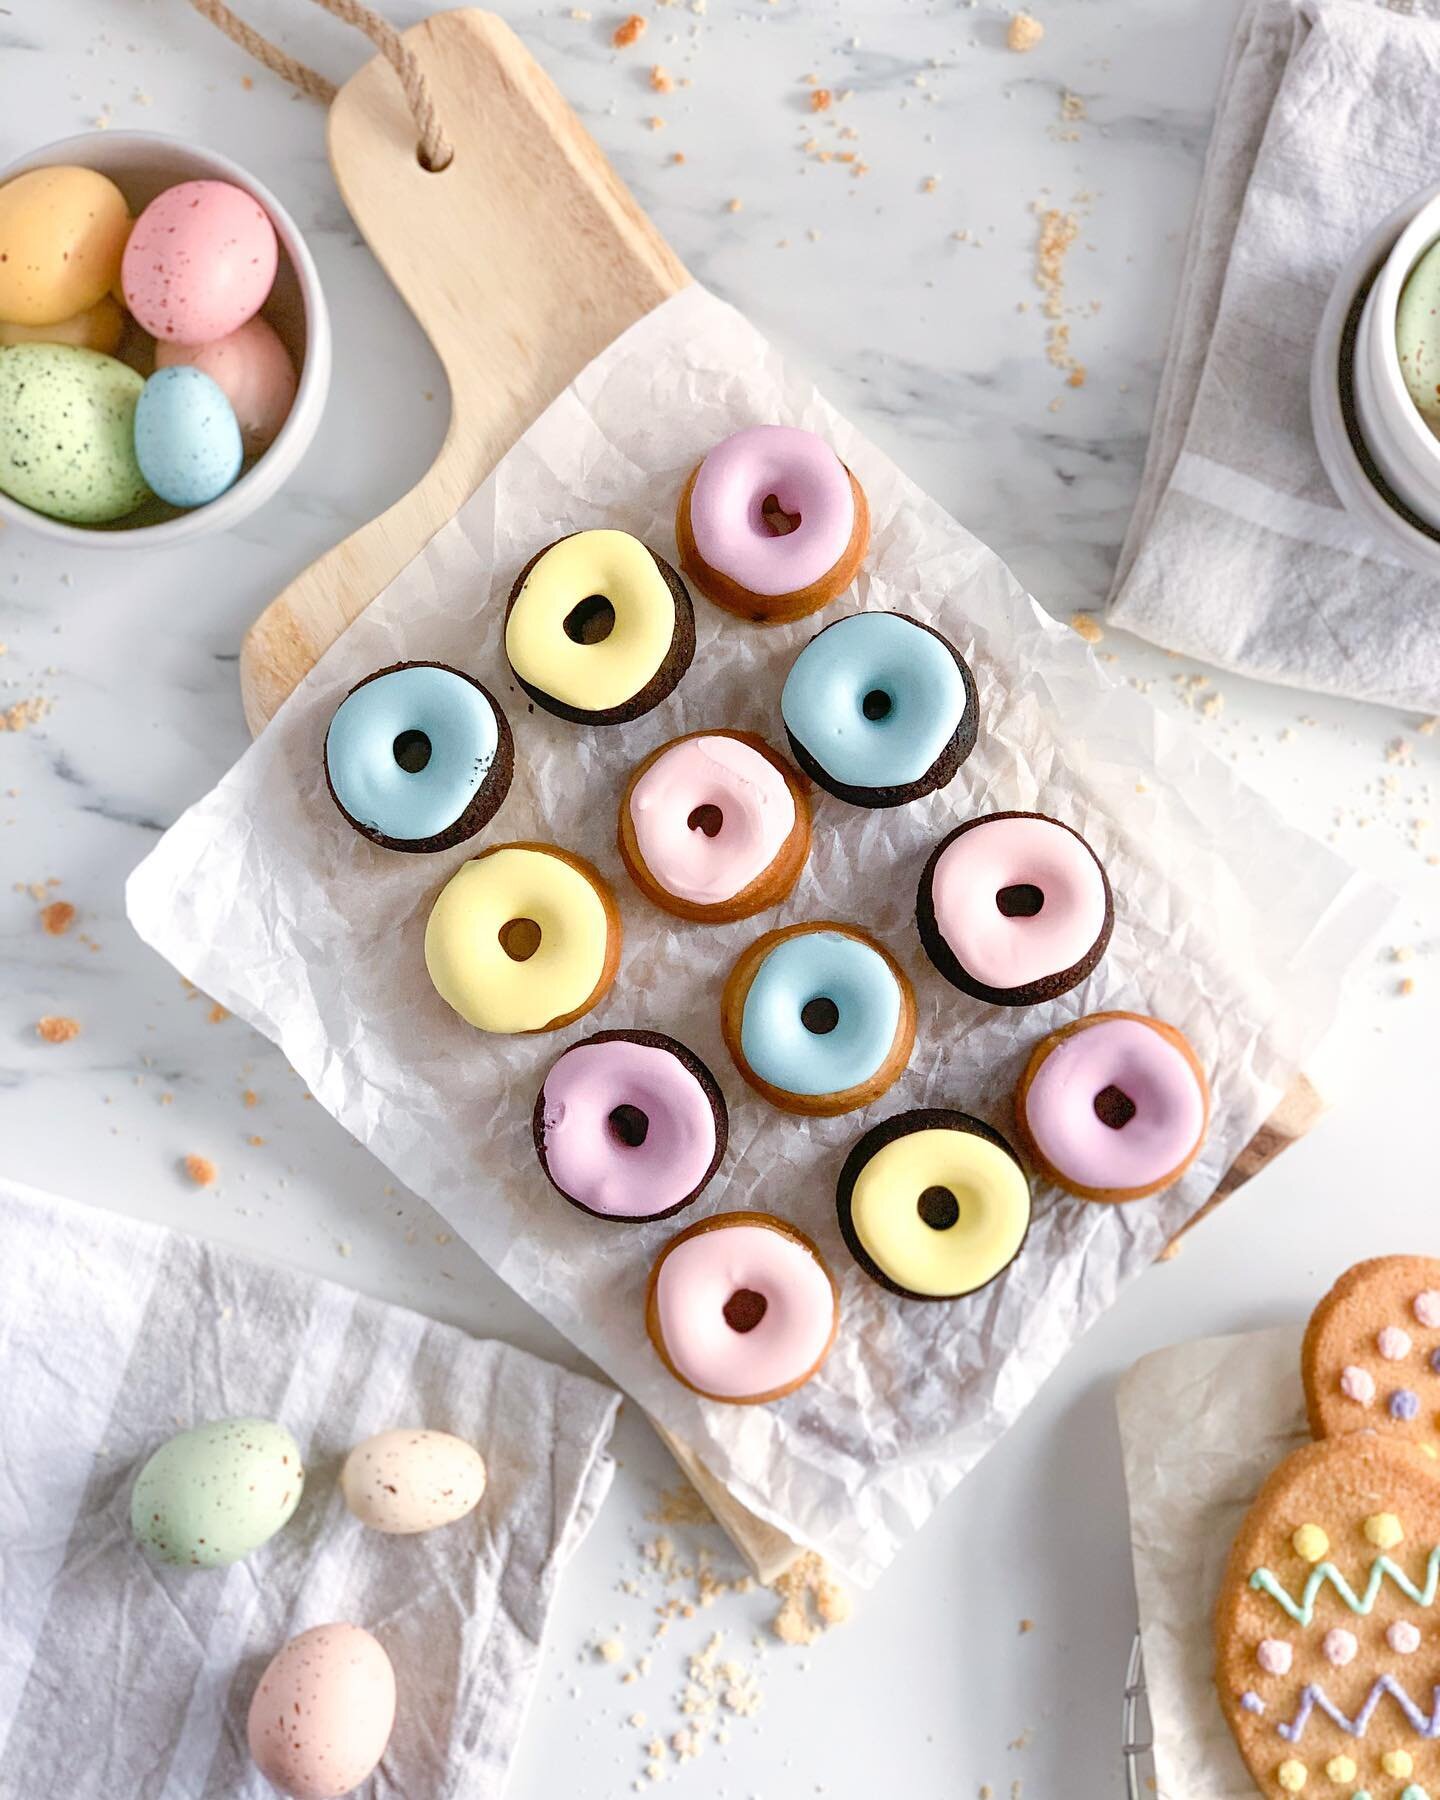 Rainbow mini donuts 🍩 gluten-free ~ grain-free ~ keto ~ paleo ~ oh so yum!

Available for daily walk ins &amp; to pre-order for Easter at order.thebutternut.ca 🐰💛

#glutenfree #grainfree #celiac #gf #keto #paleo #lowcarb #natural #naturalfood #pal